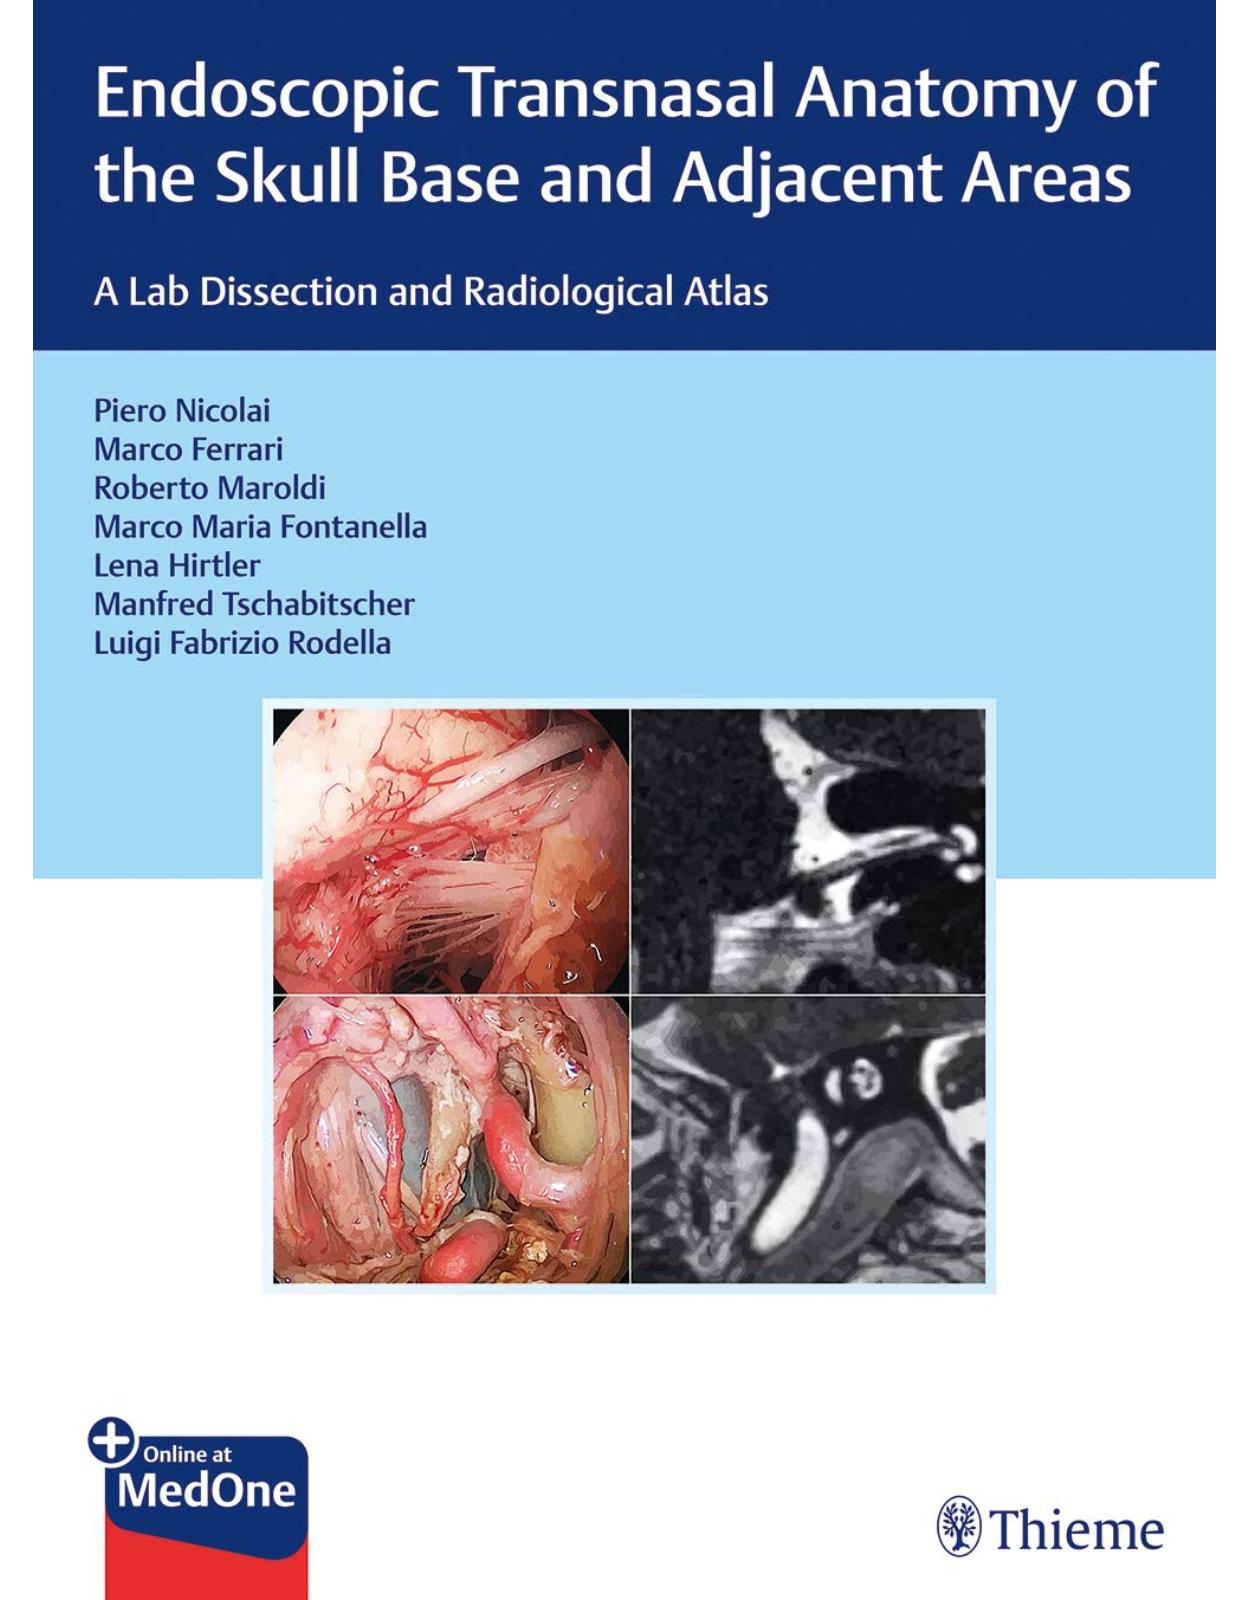 Endoscopic Transnasal Anatomy of the Skull Base and Adjacent Areas: A Lab Dissection and Radiological Atlas